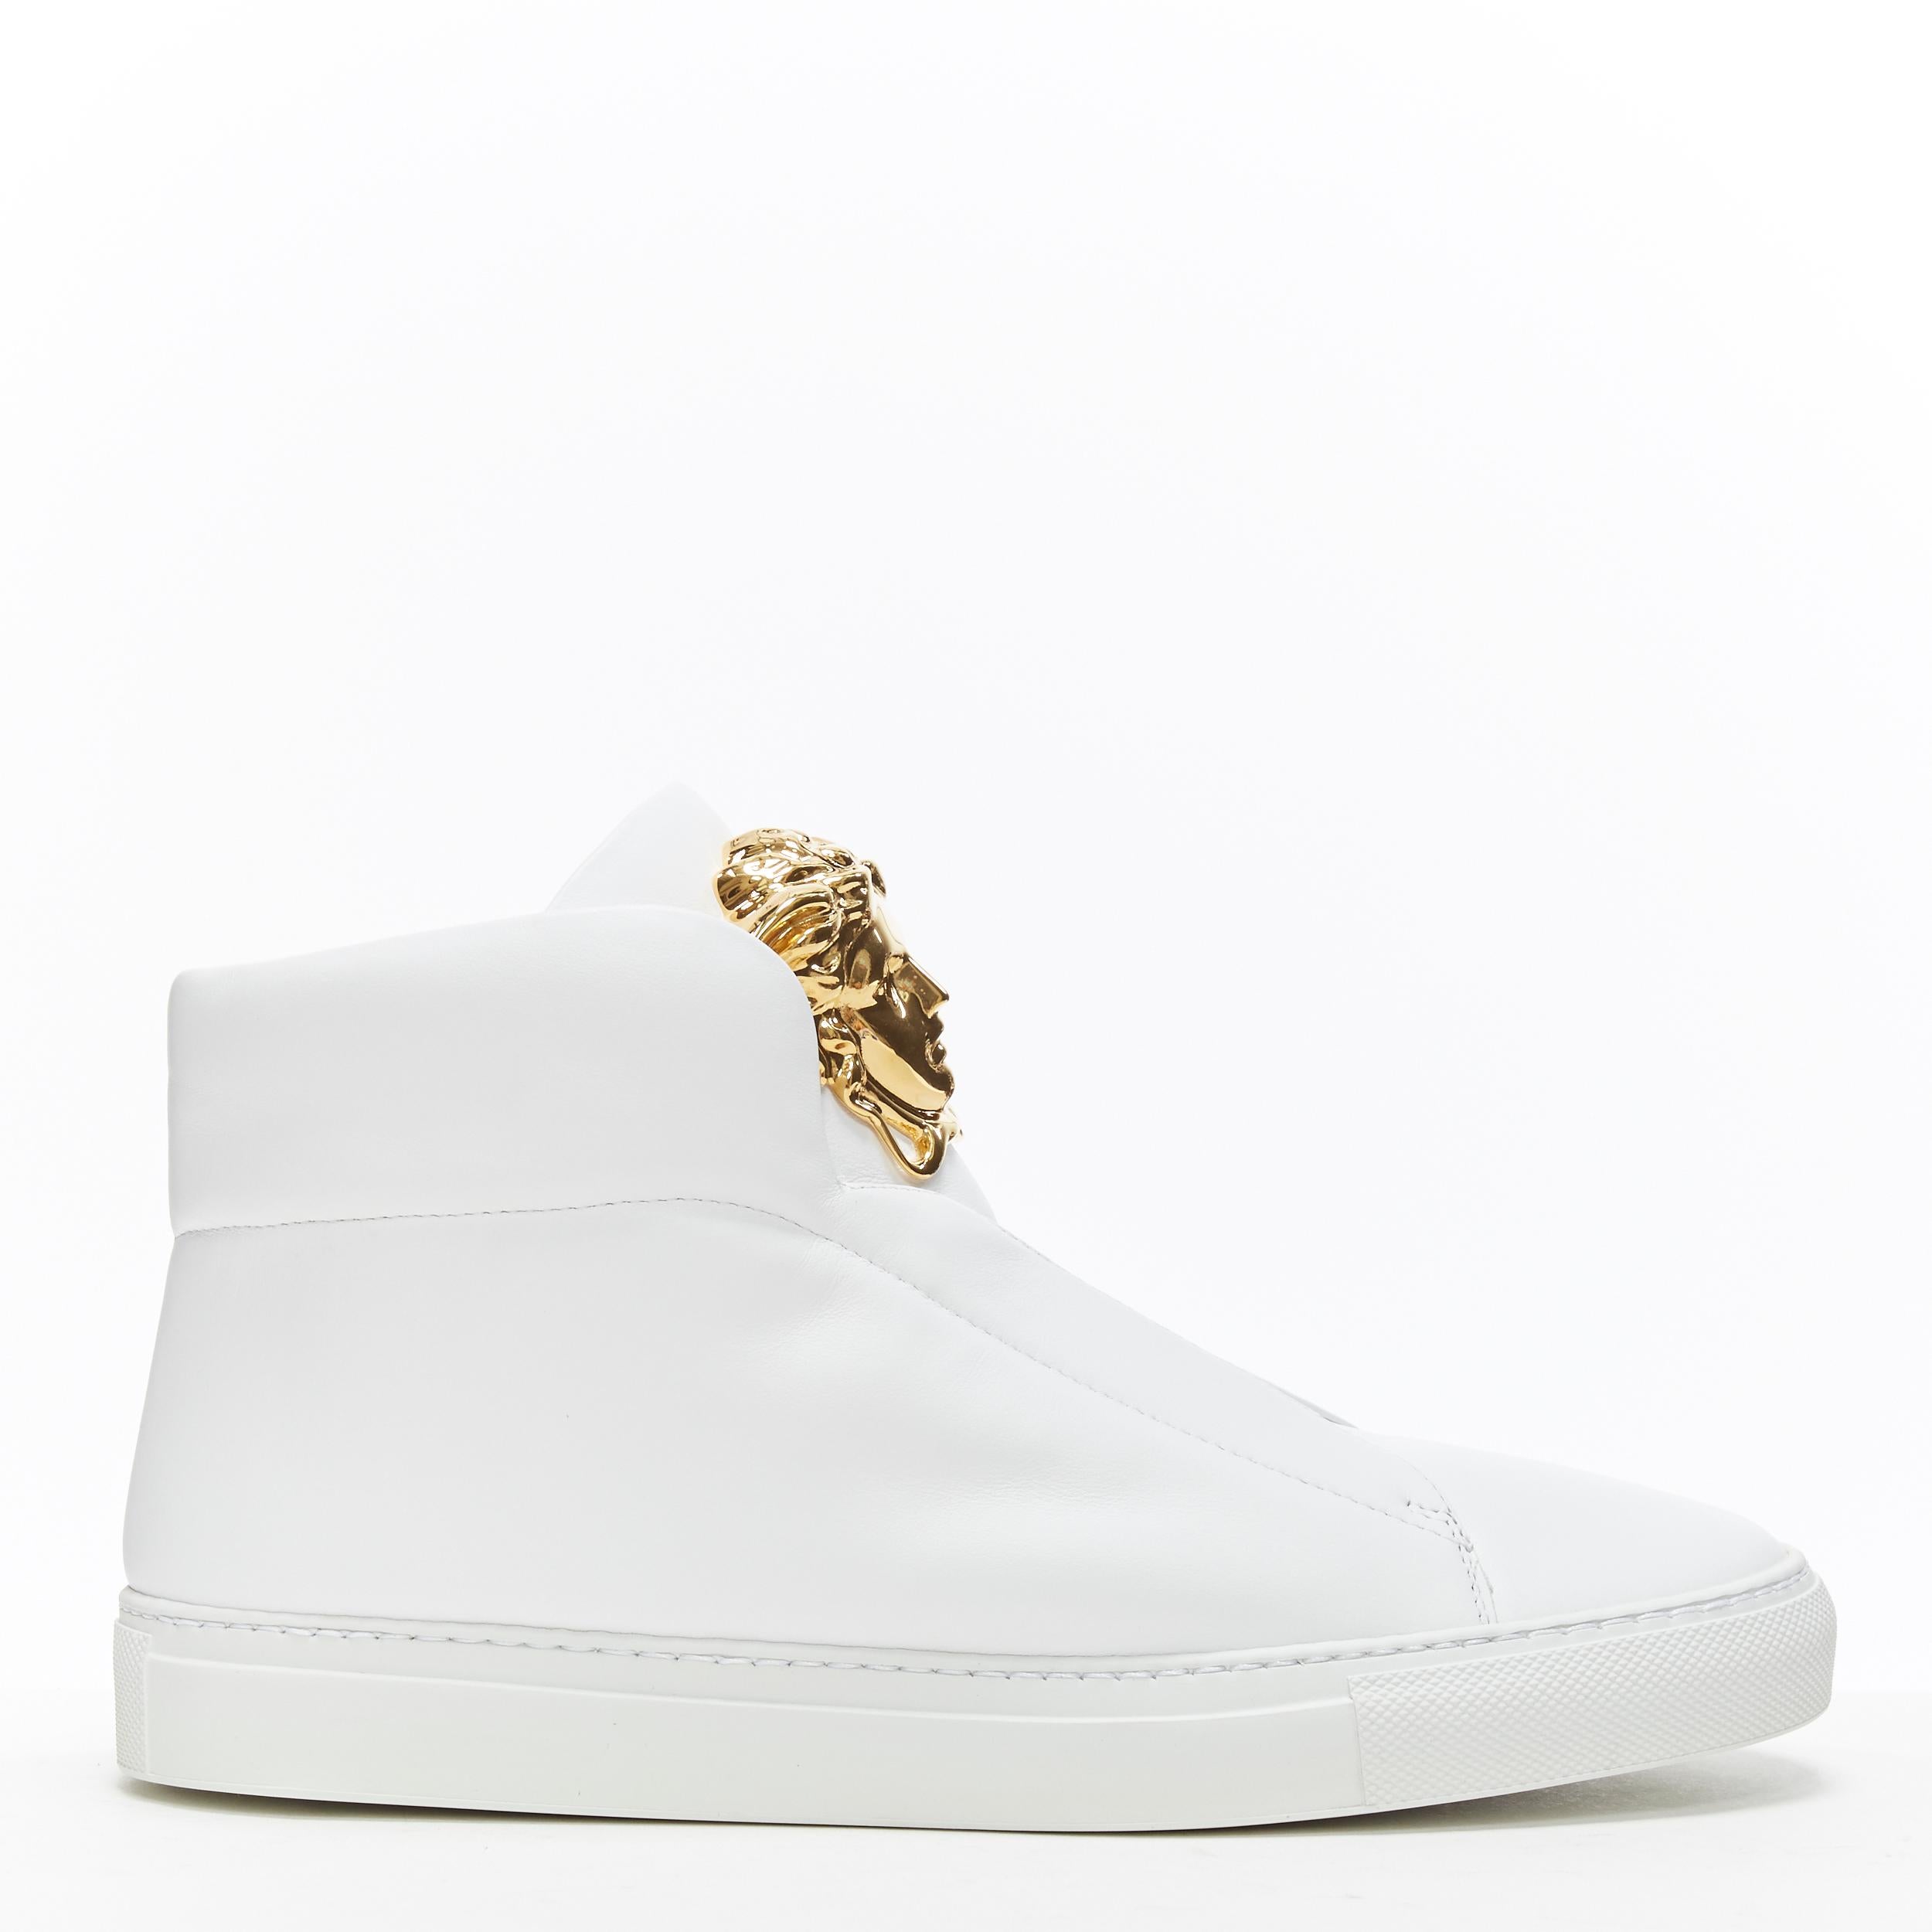 new VERSACE Palazzo gold Medusa white calfskin leather high top sneaker ...